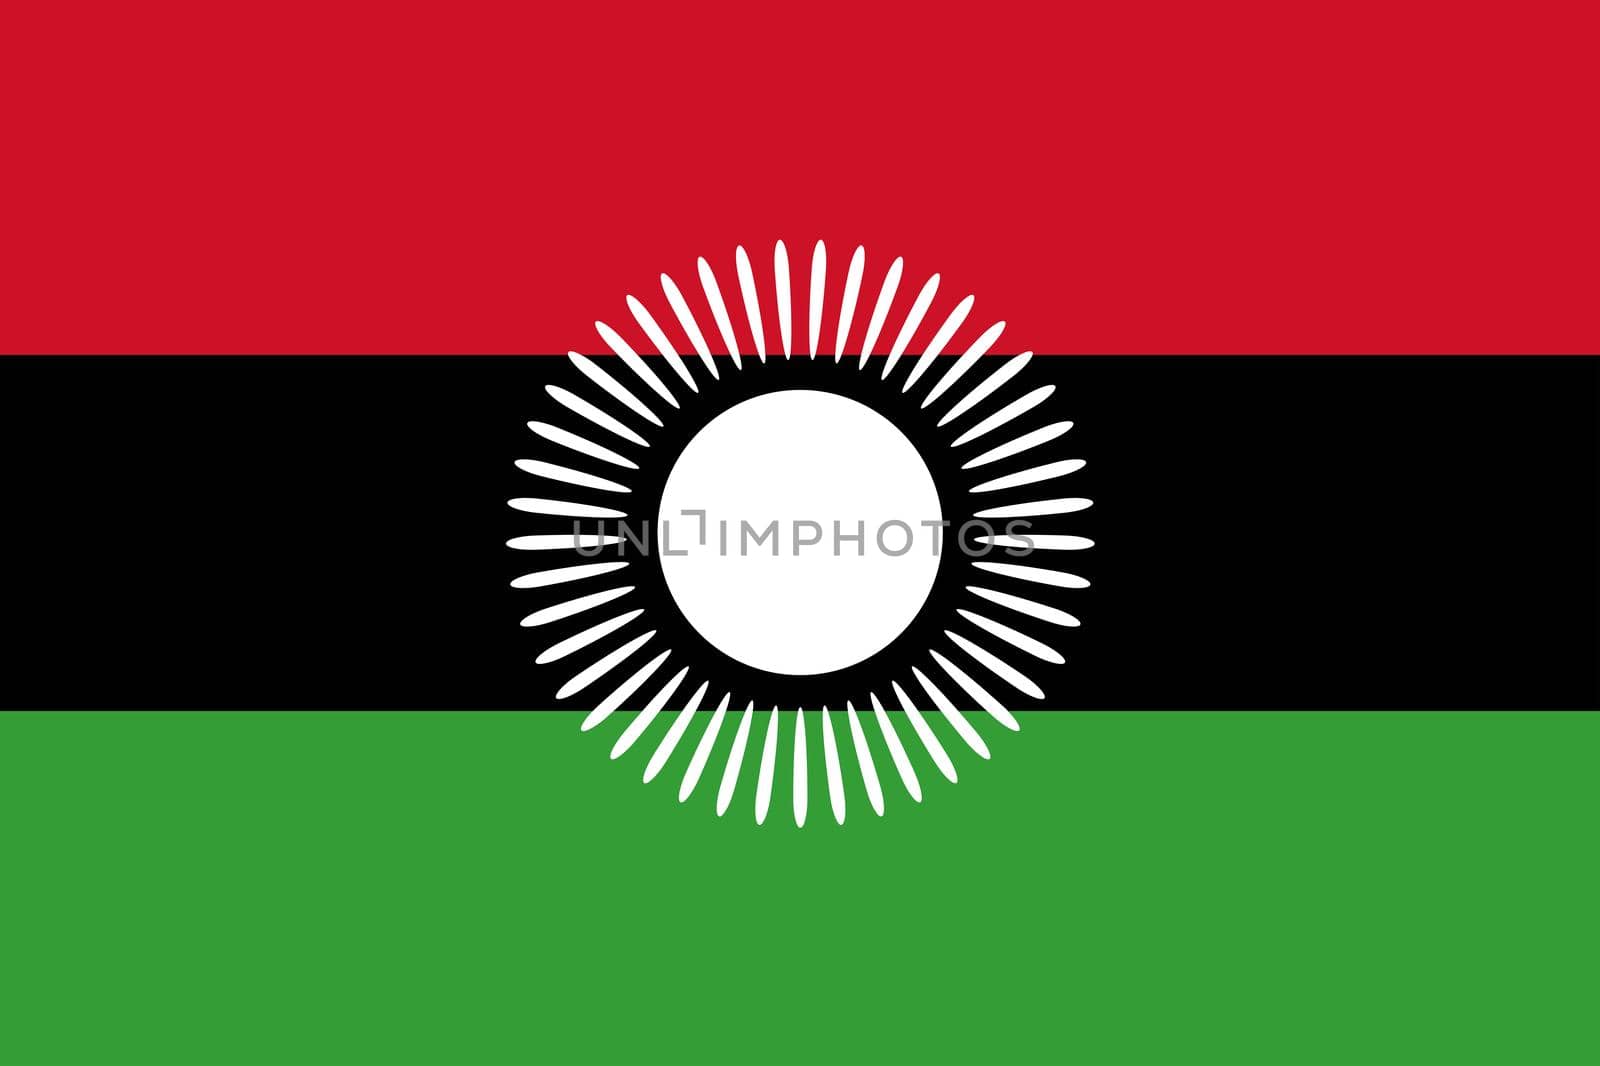 The flag of the African country of Malawi